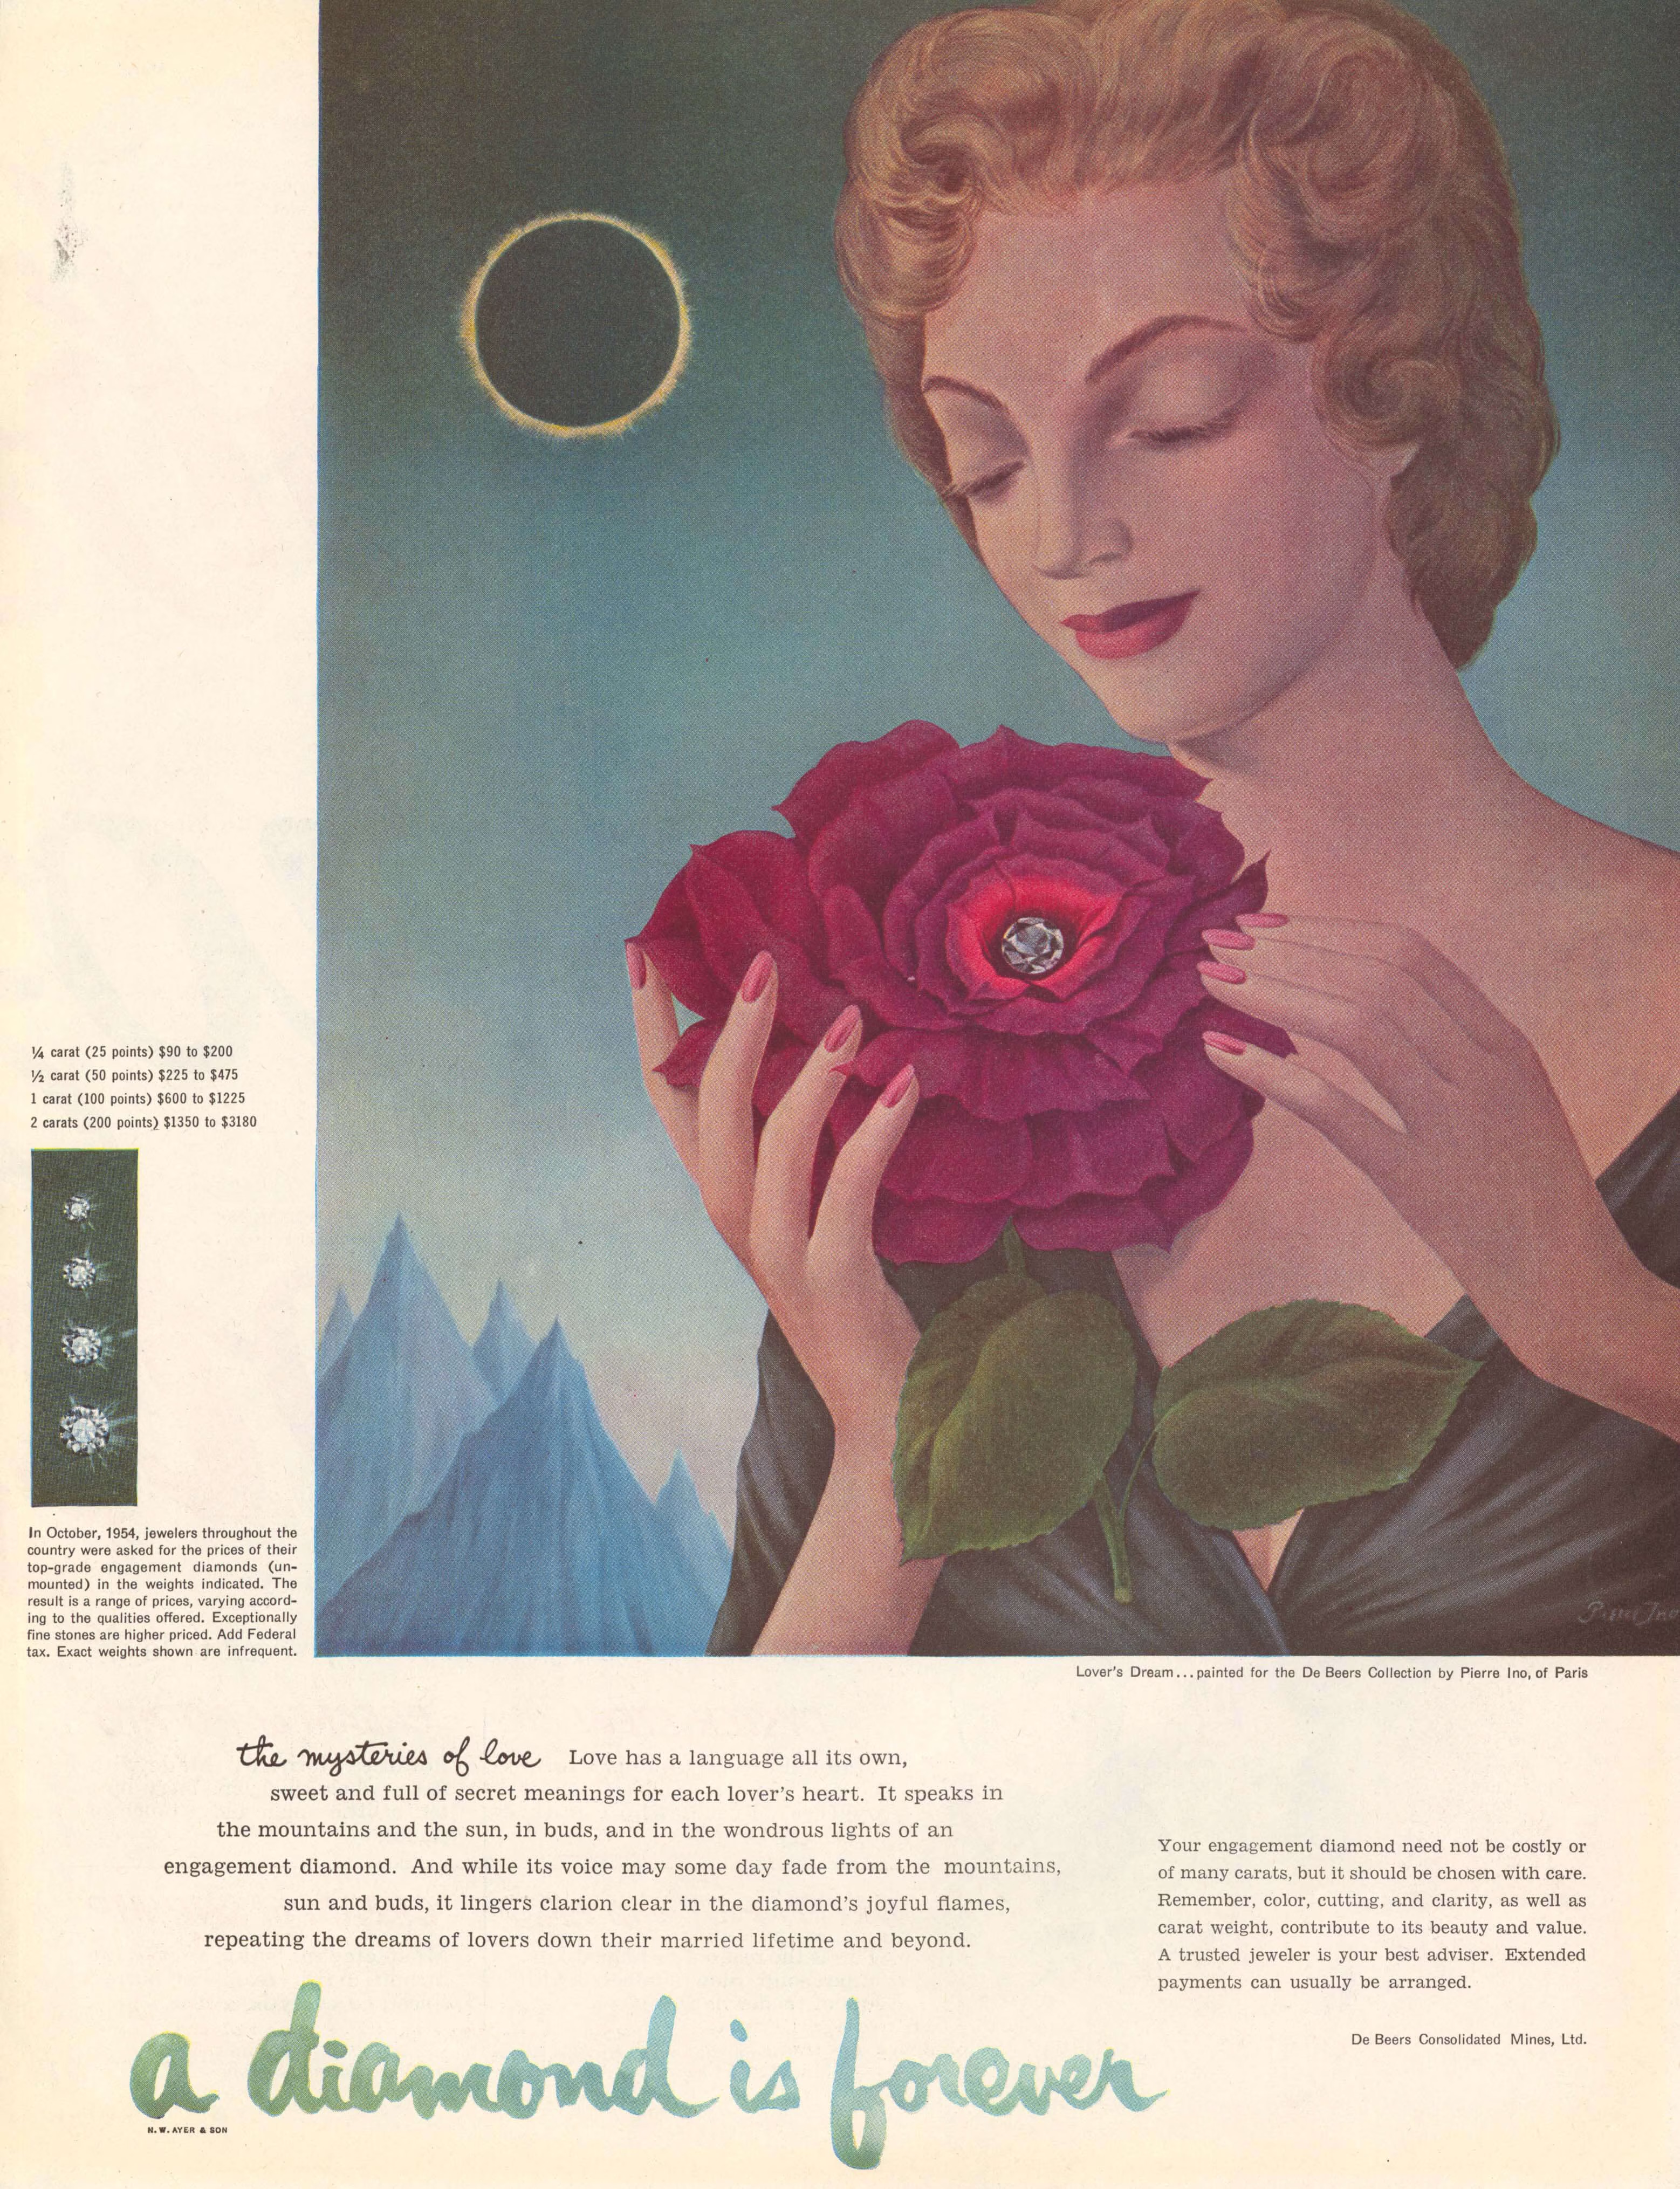 "A Diamond is Forever" a marketing campaign by De Beers in 1947